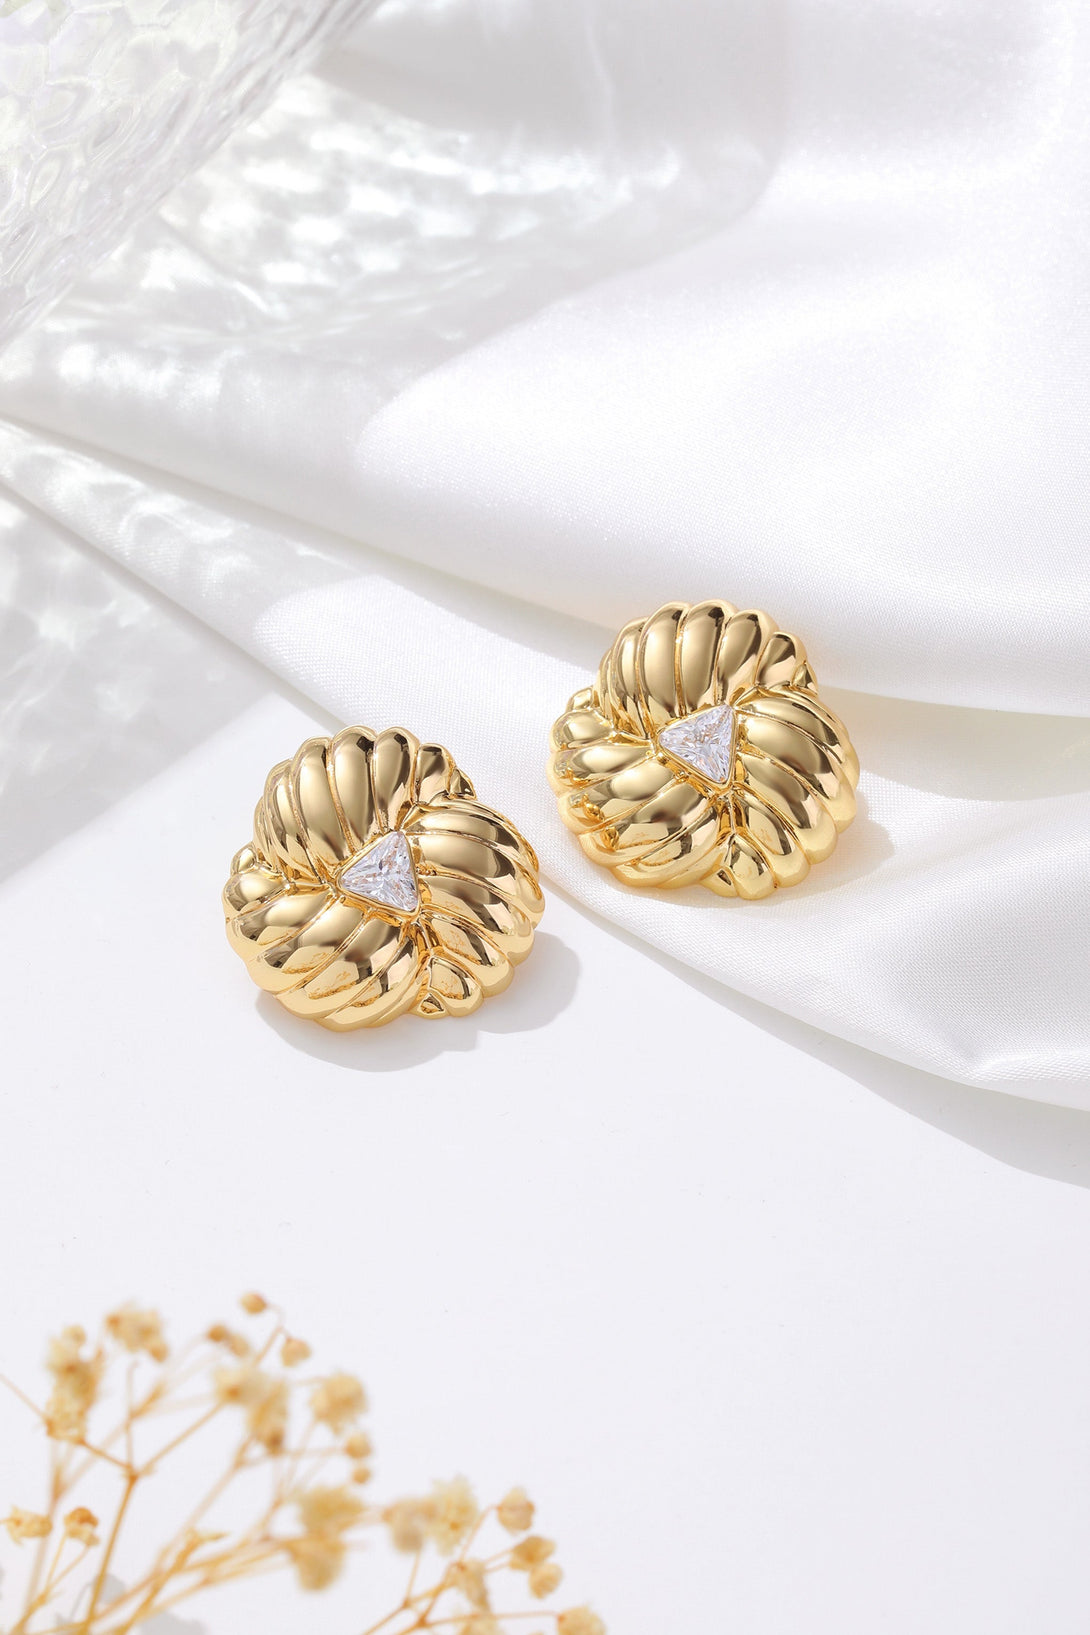 Gold Clover Designed Stud Earrings - Classicharms